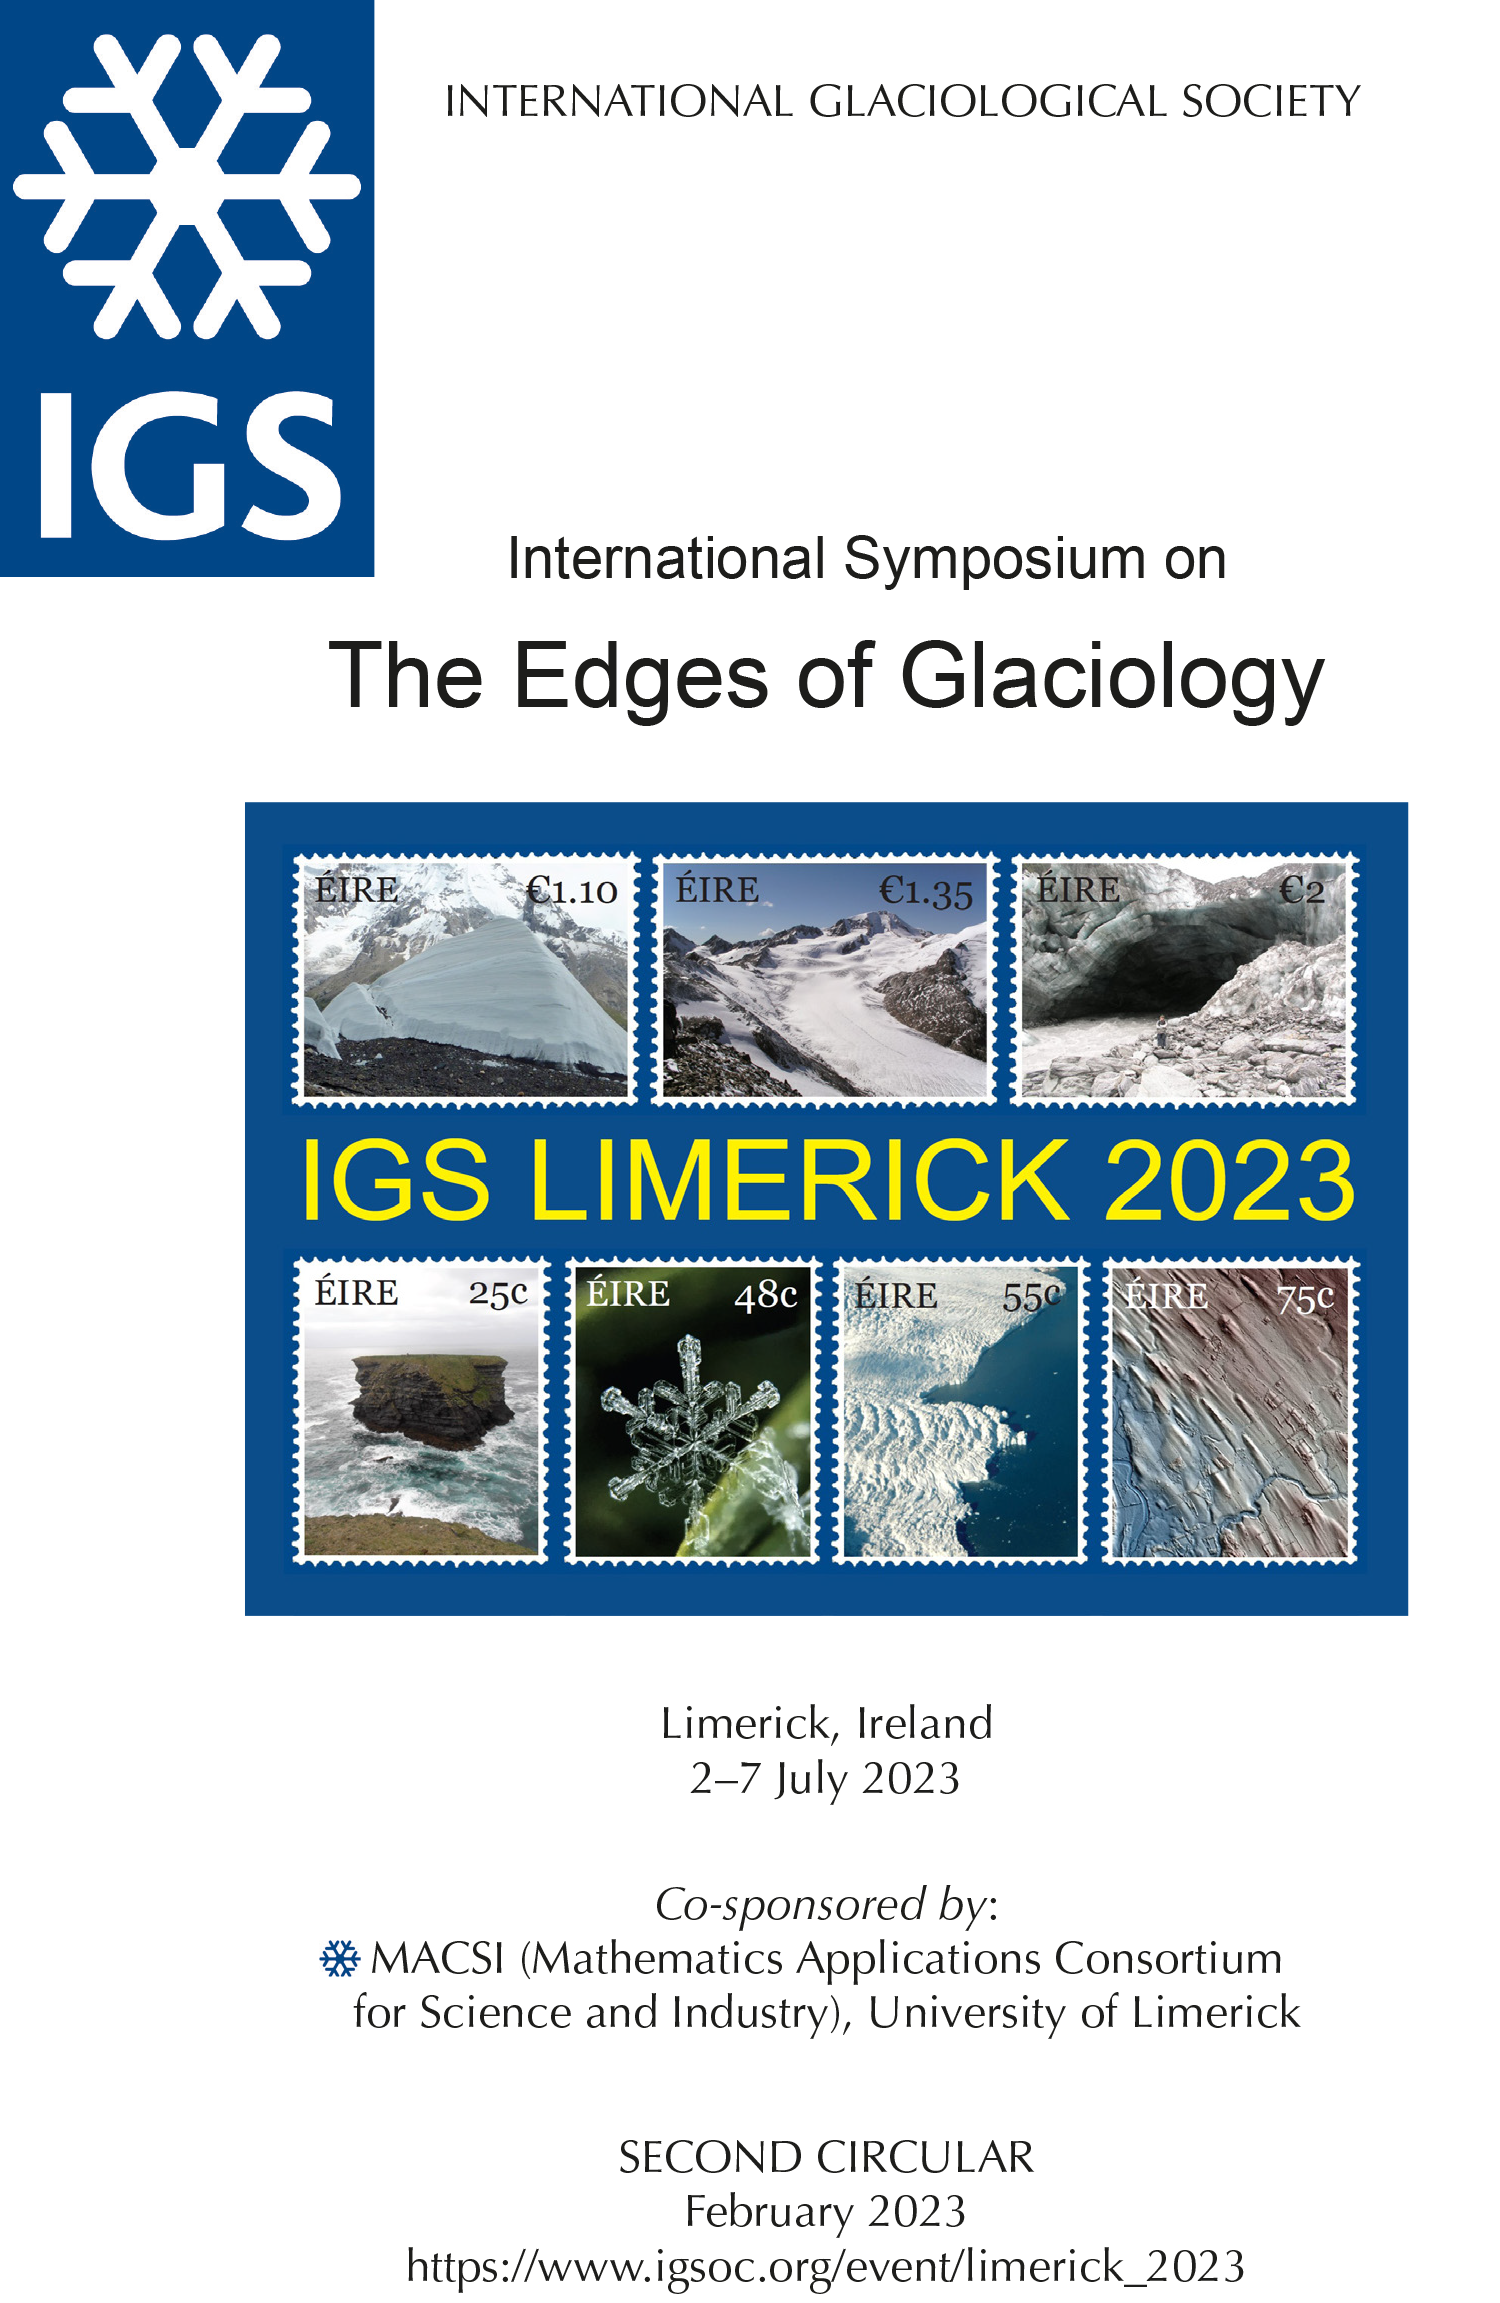 The Second Circular for the International Symposium on the Edges of Glaciology is now online